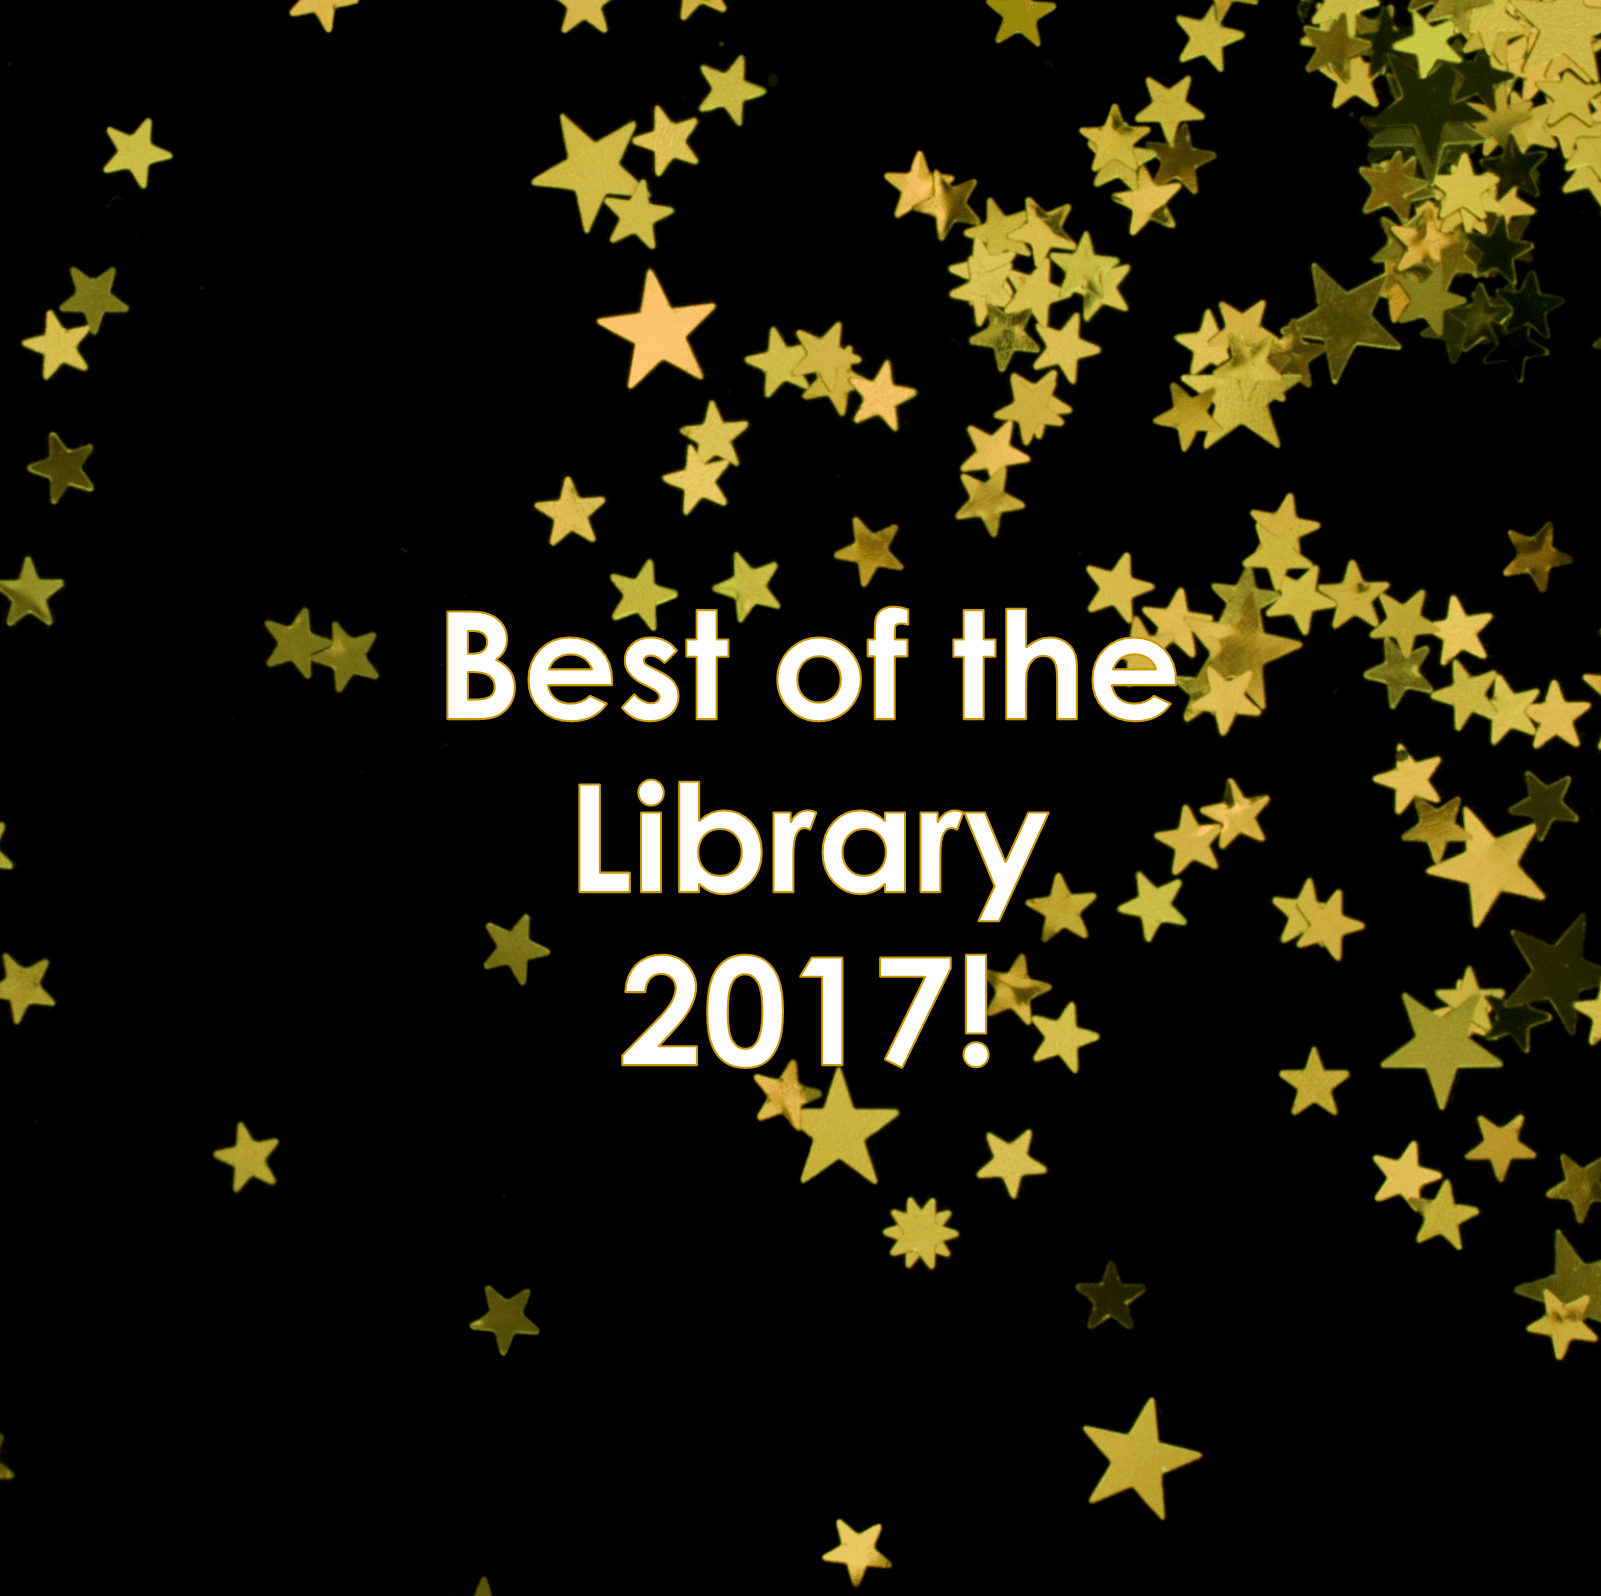 Best of the library 2017 with black background and stars